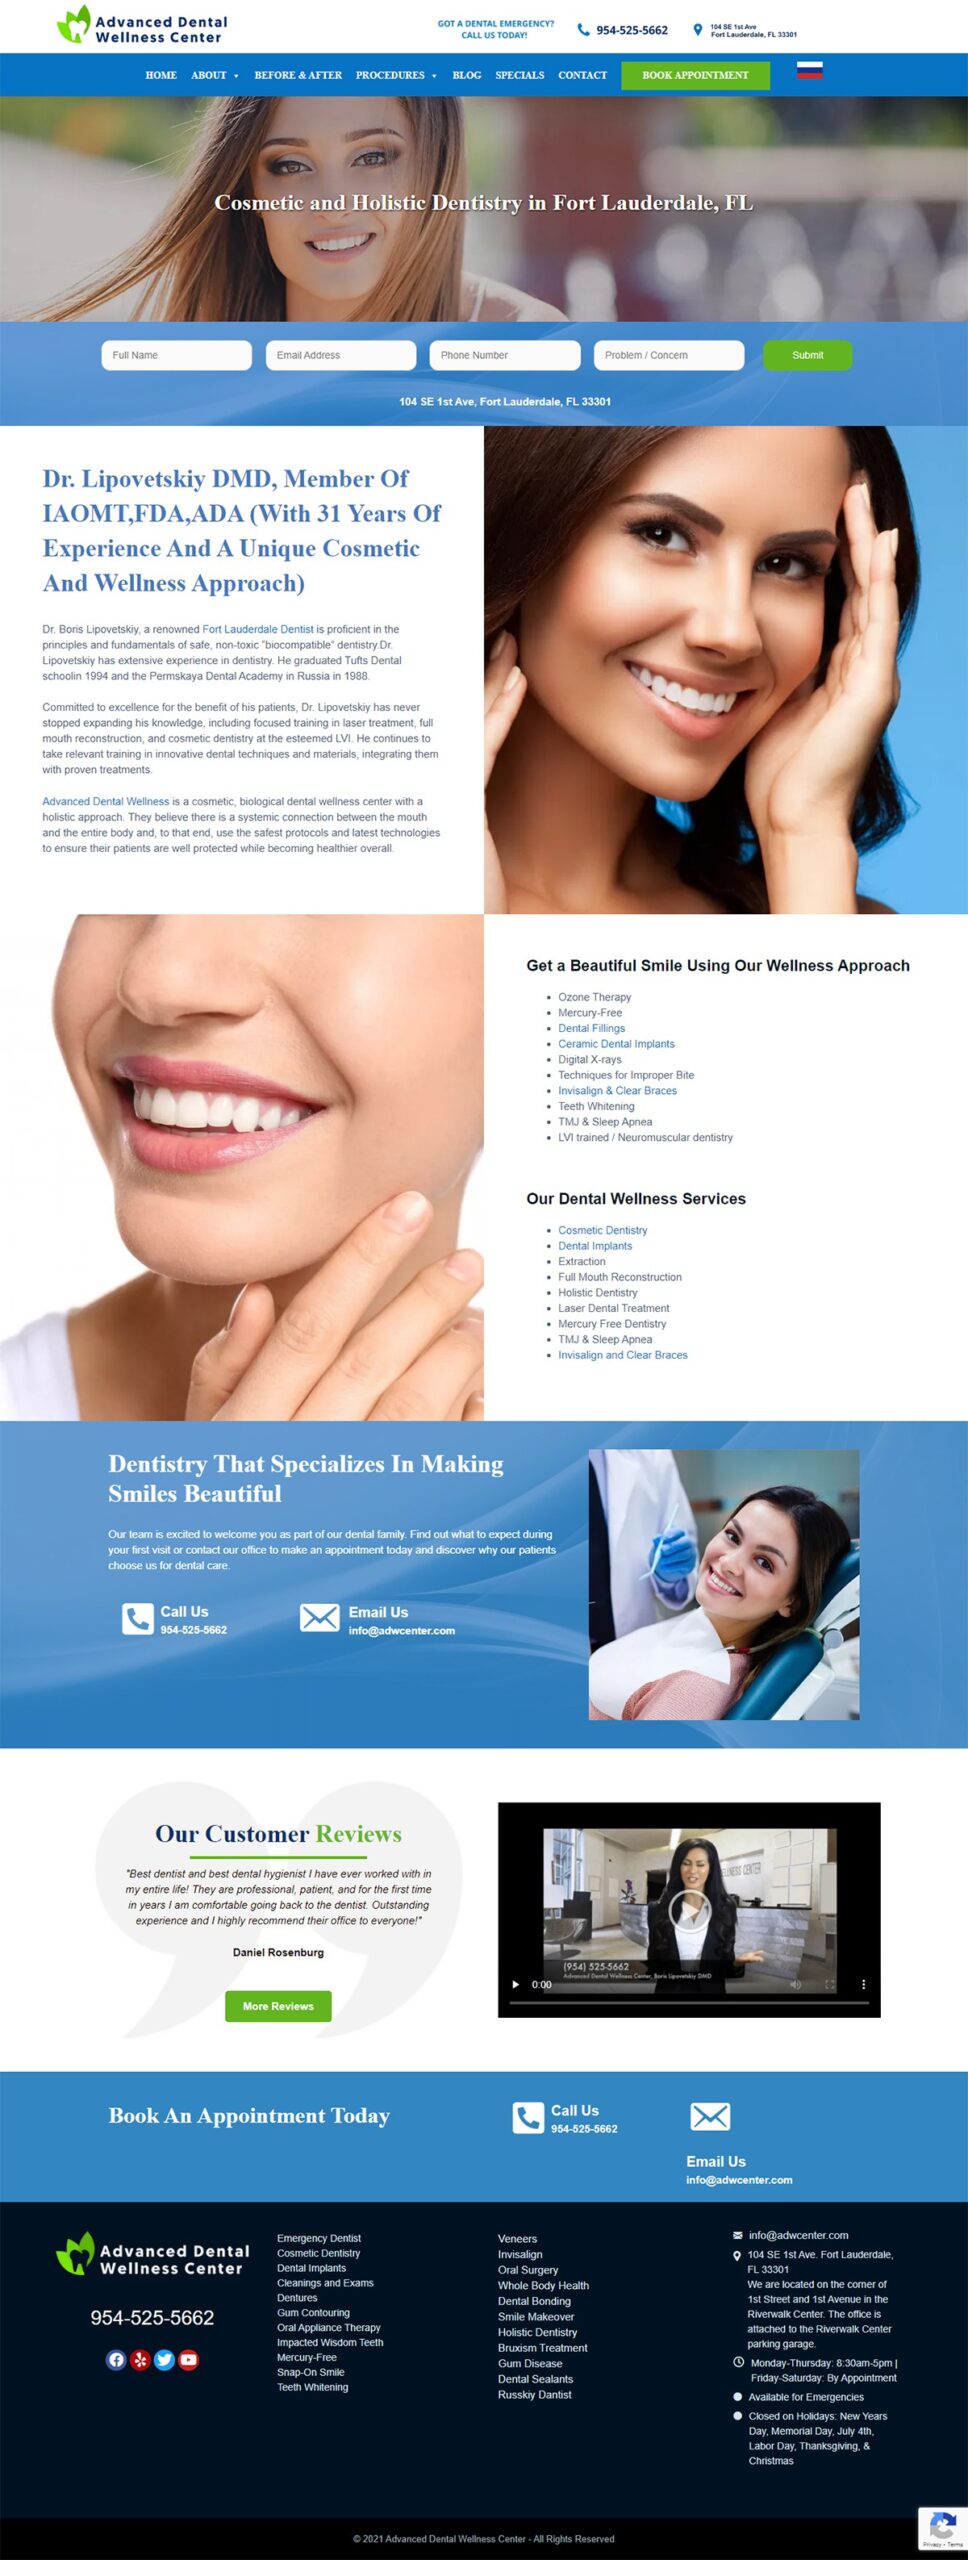 adwcenter-cosmetic-and-holistic-dentistry